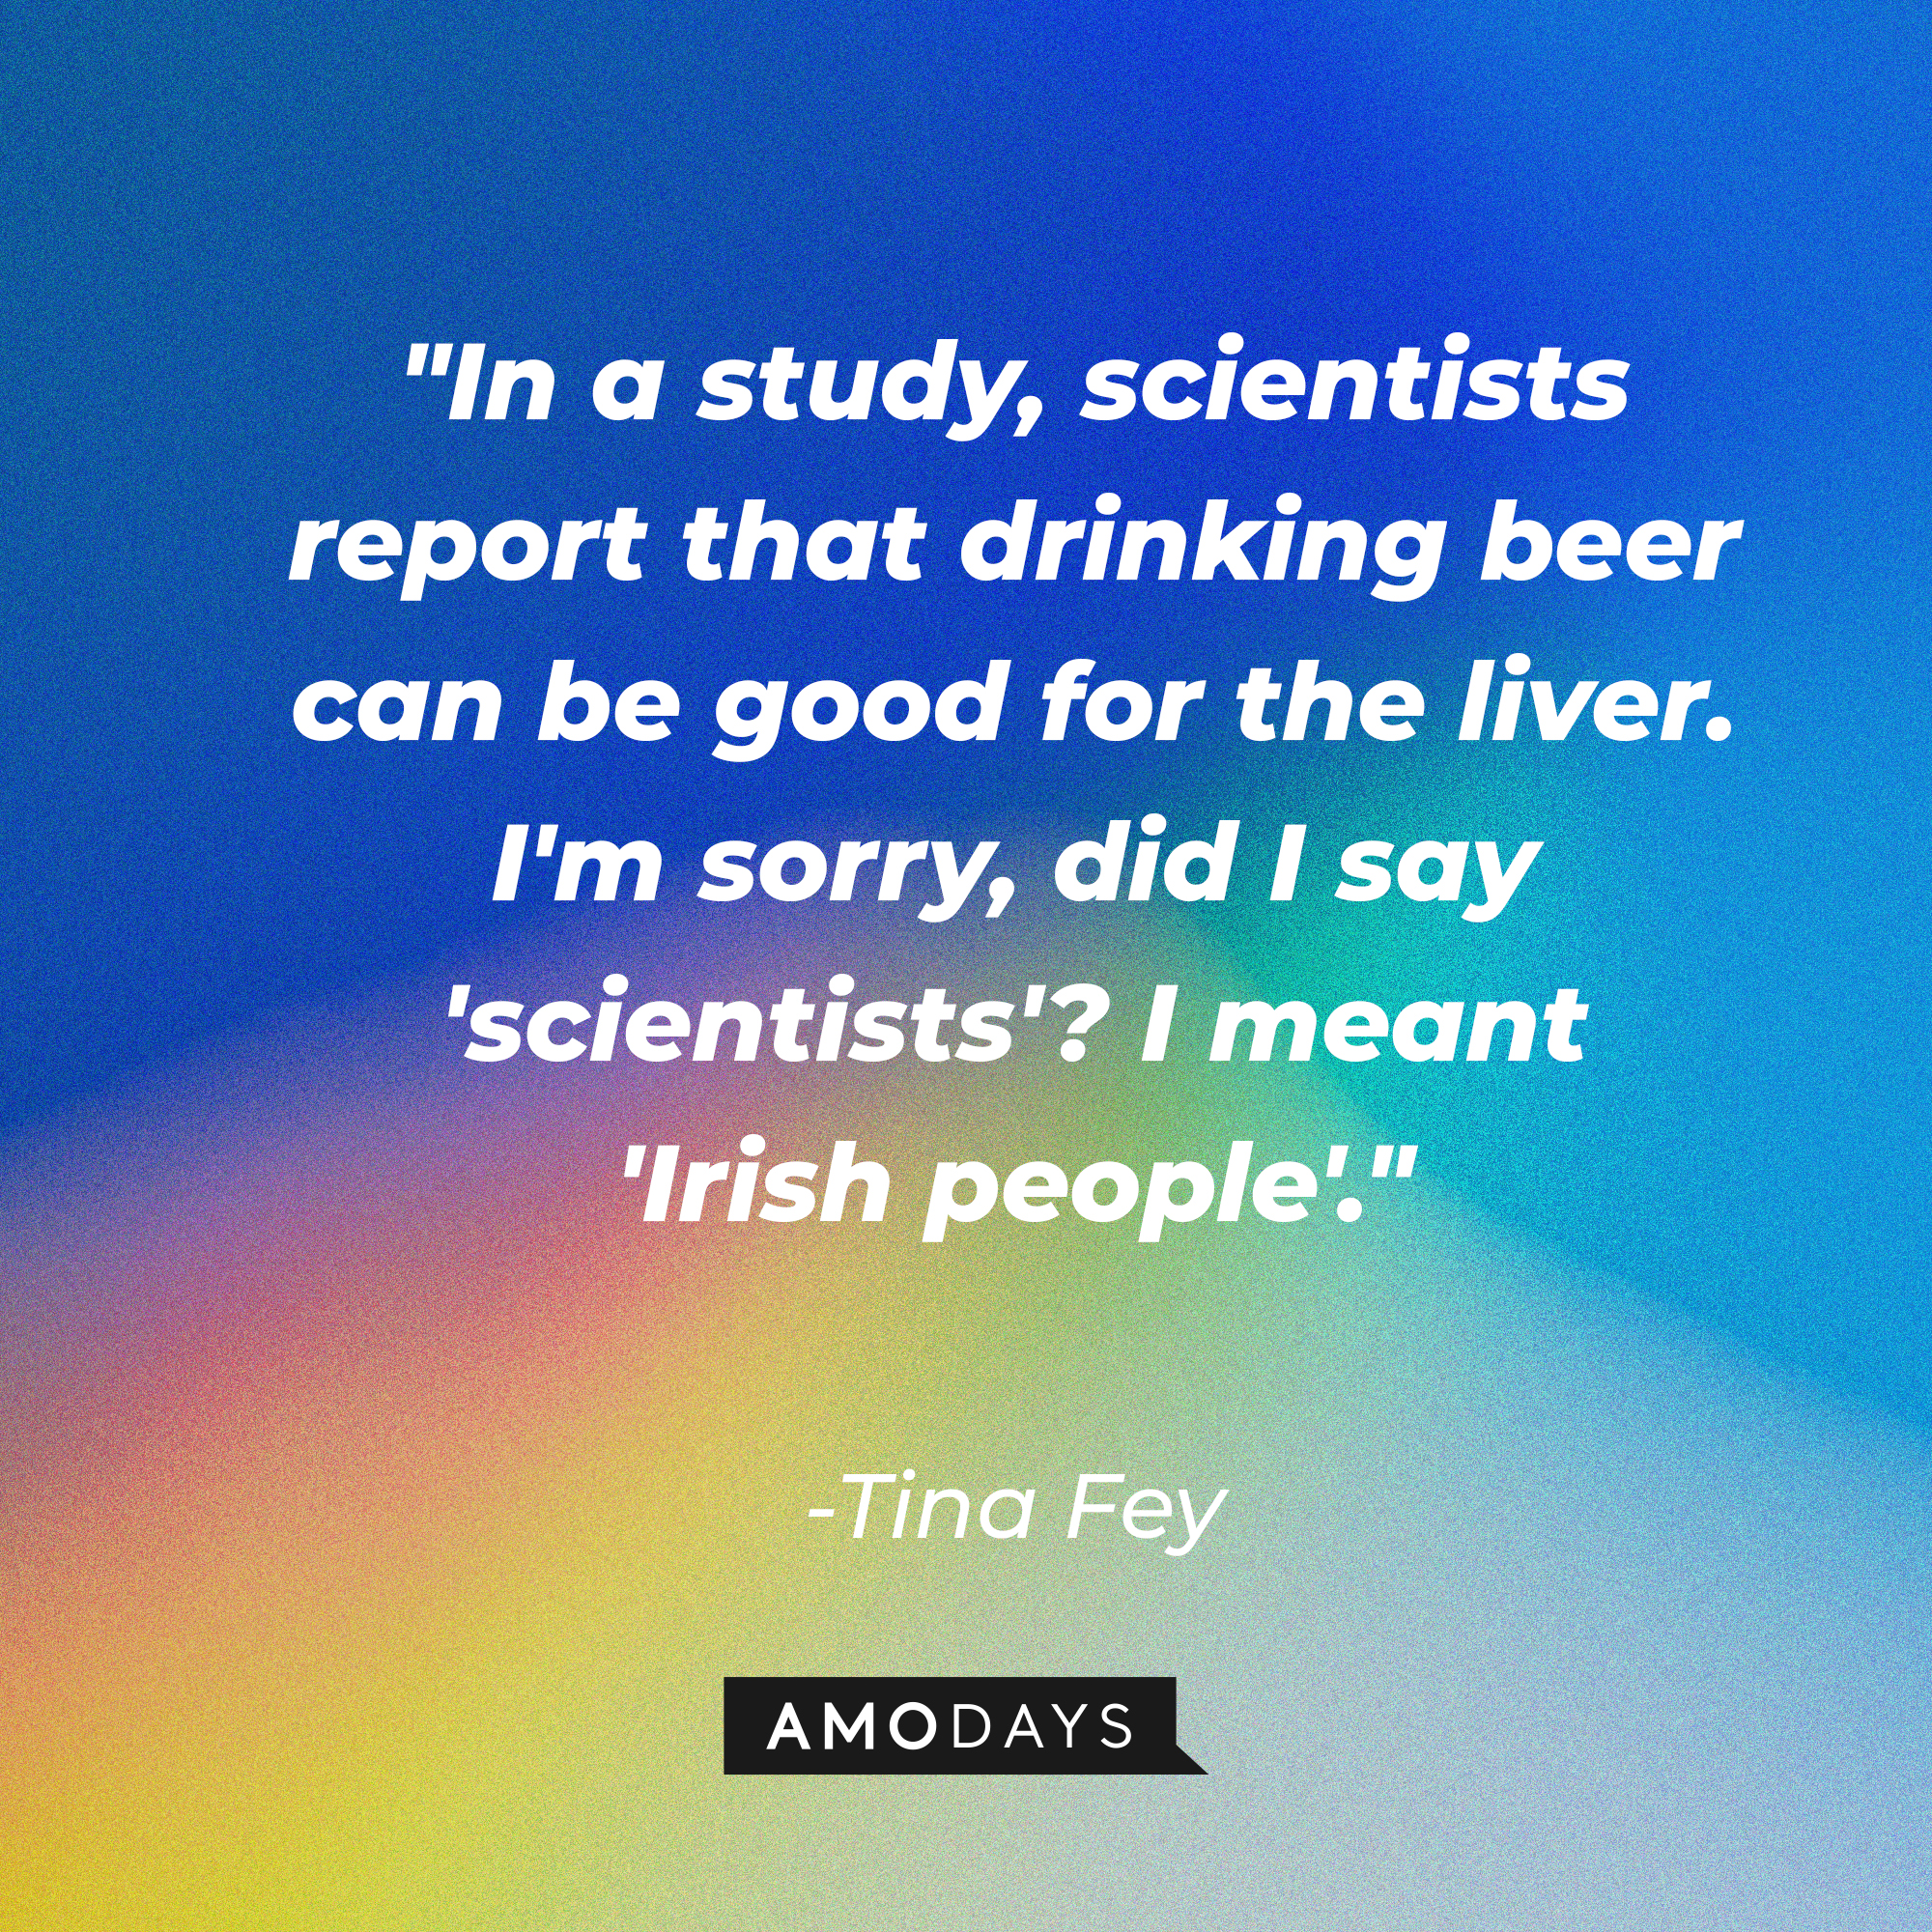 Tina Fey's quote: "In a study, scientists report that drinking beer can be good for the liver. I'm sorry, did I say 'scientists'? I meant 'Irish people'." | Source: AmoDays